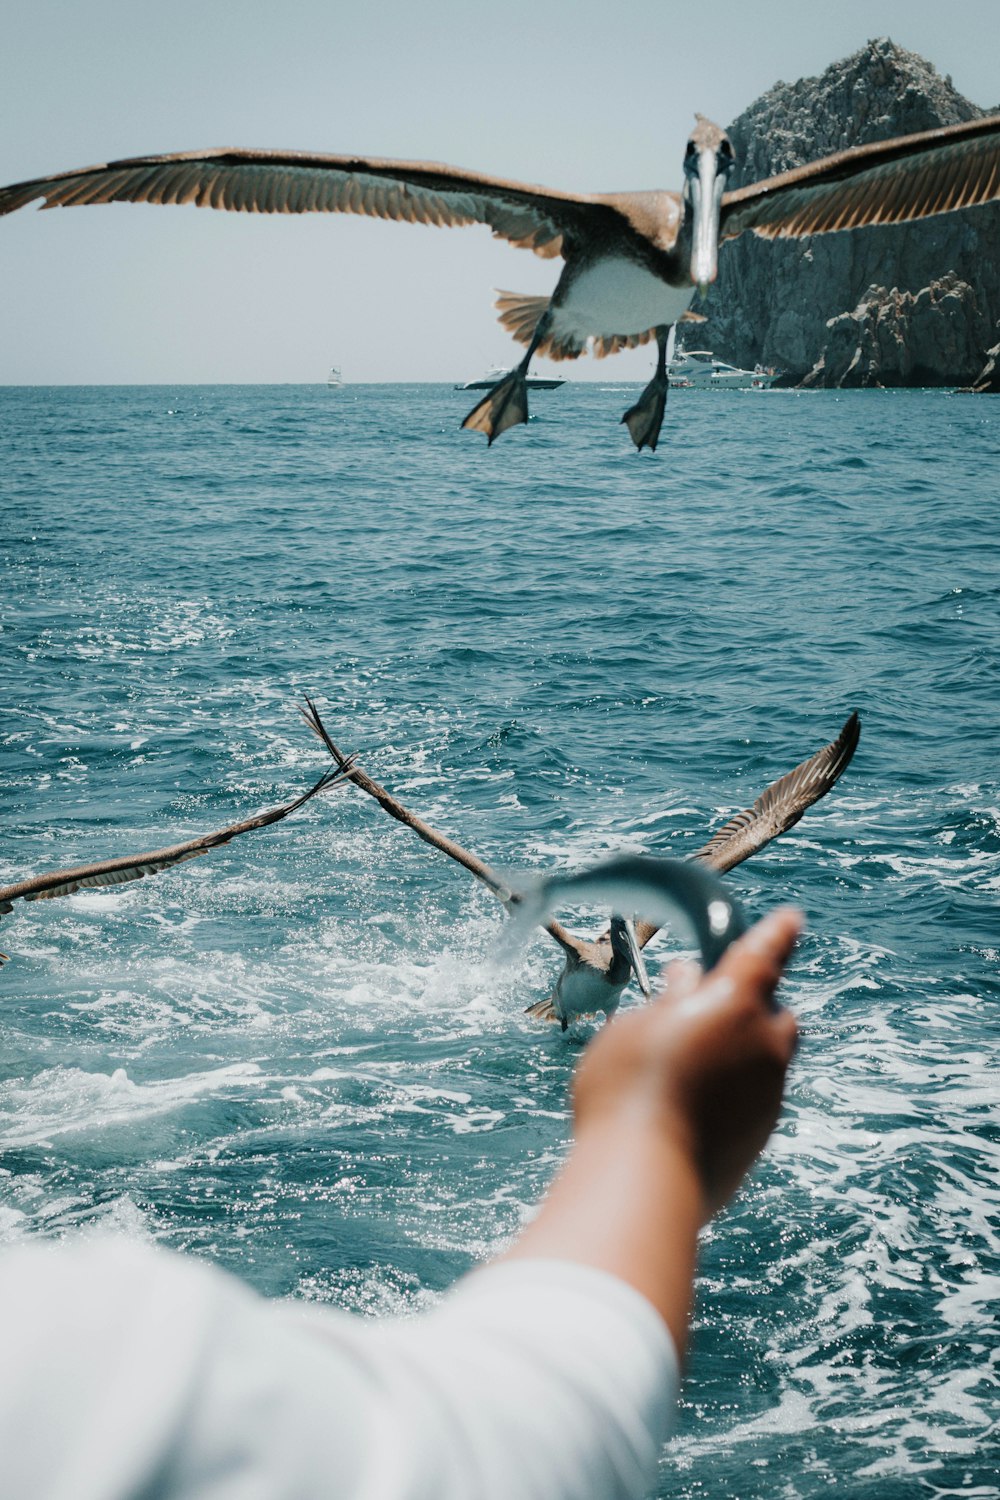 a bird flying over a body of water next to a person